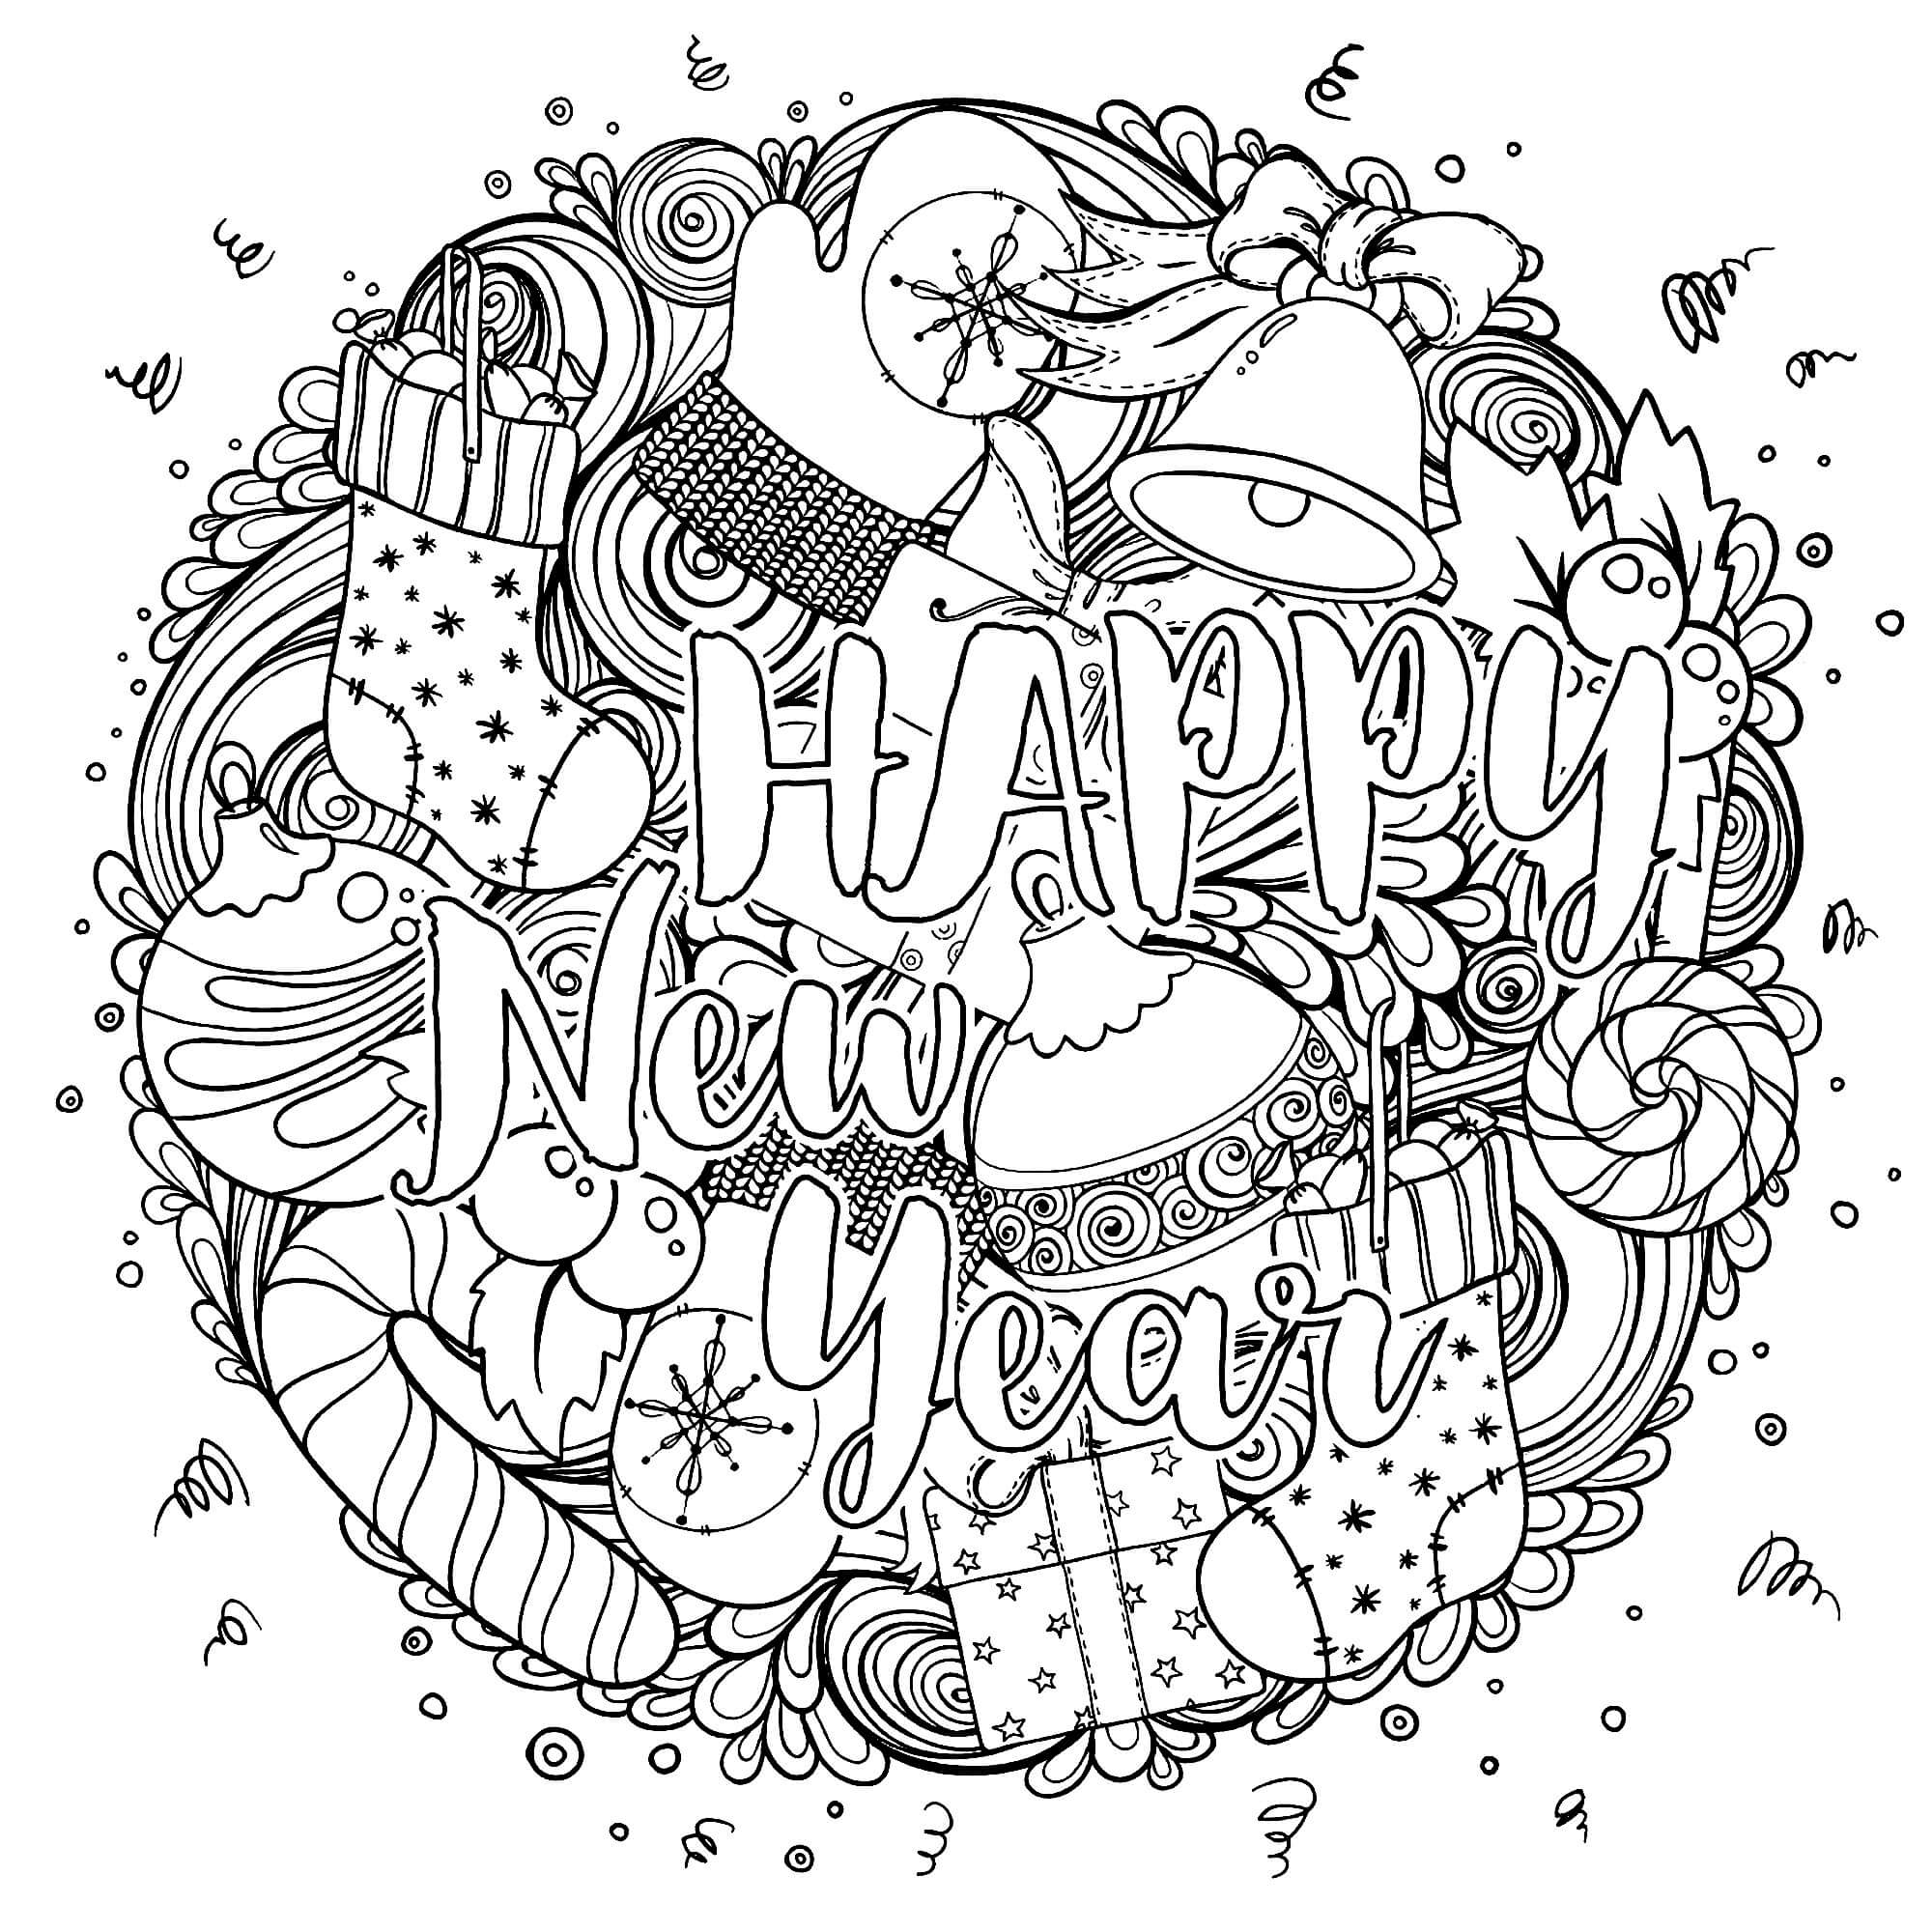 20 Happy New Year Coloring Pages for Adults   Happier Human